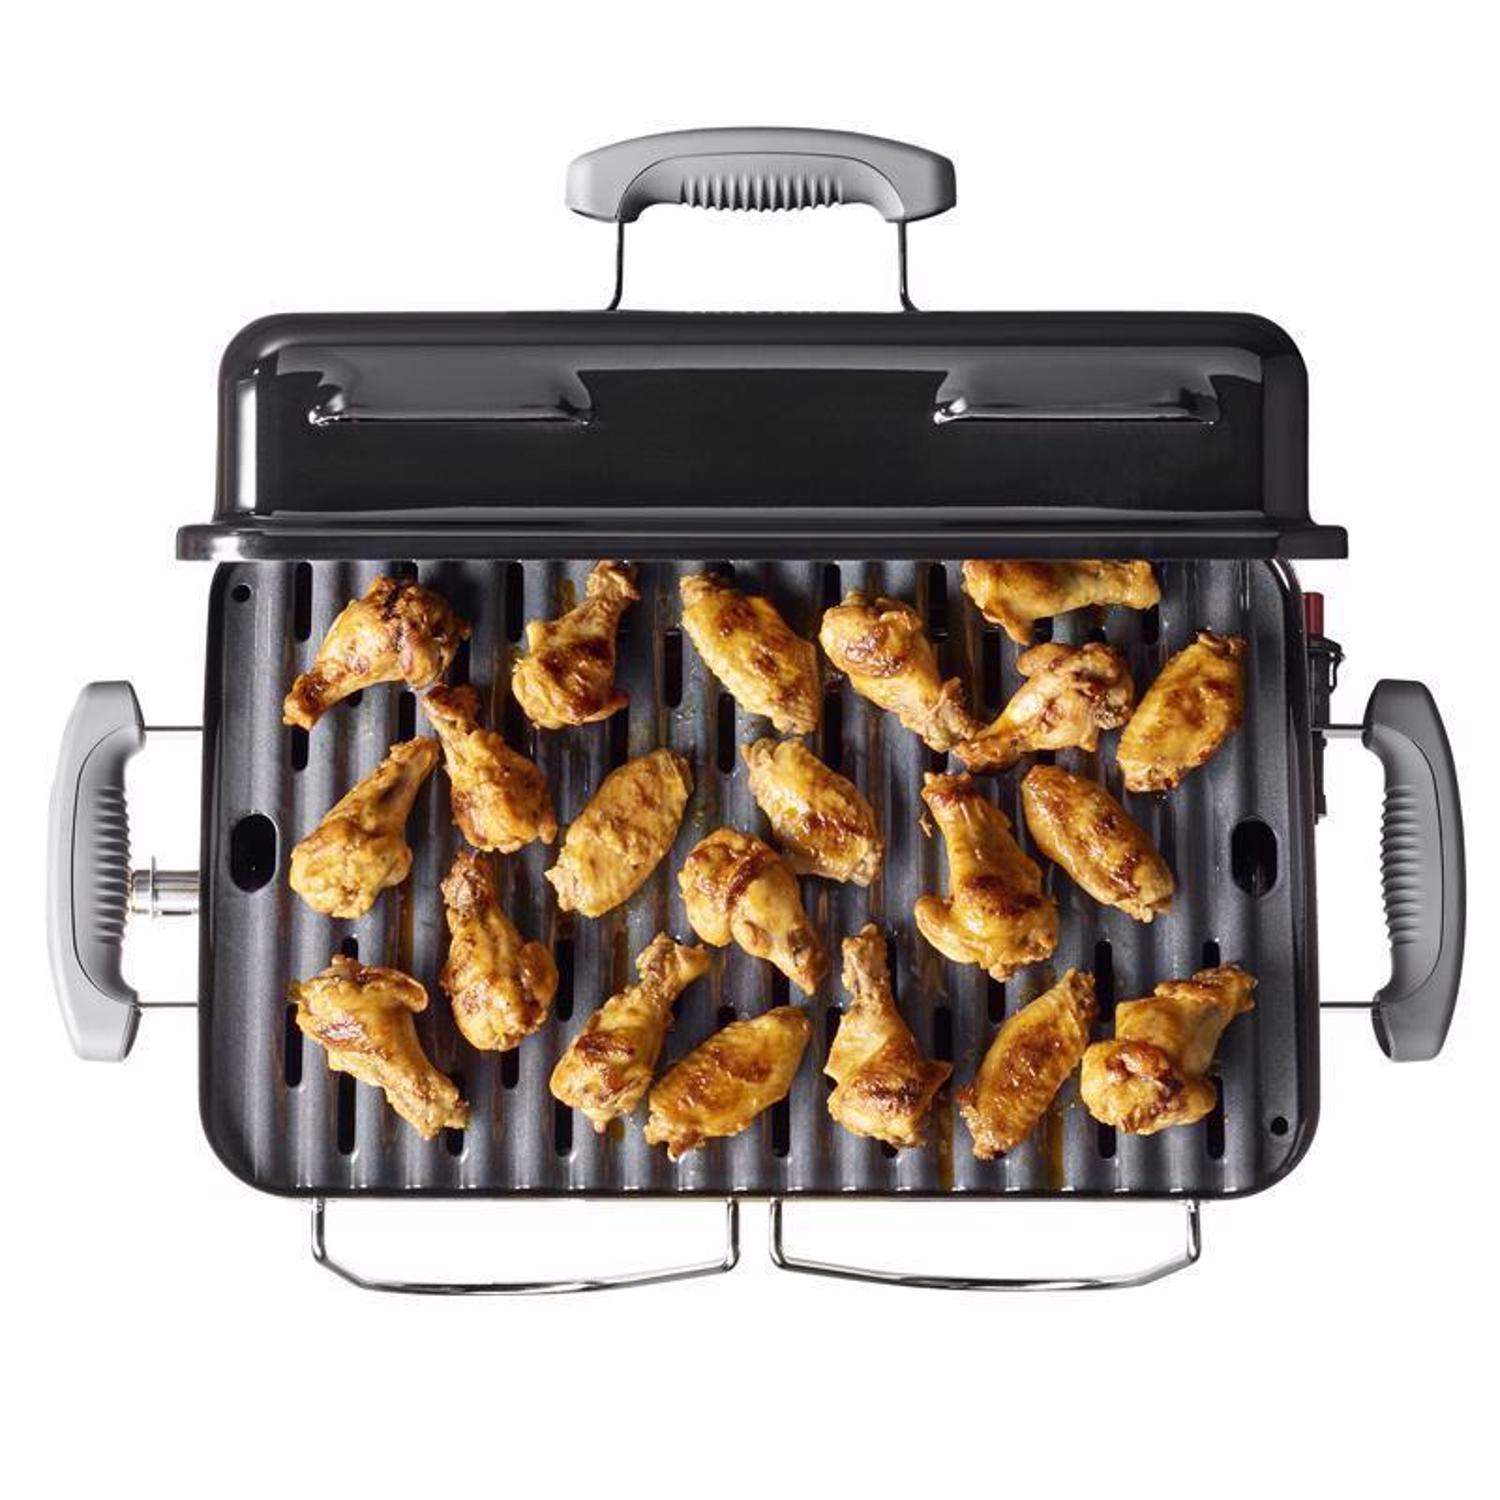 Grill Anytime, Anywhere with This Stovetop Grill